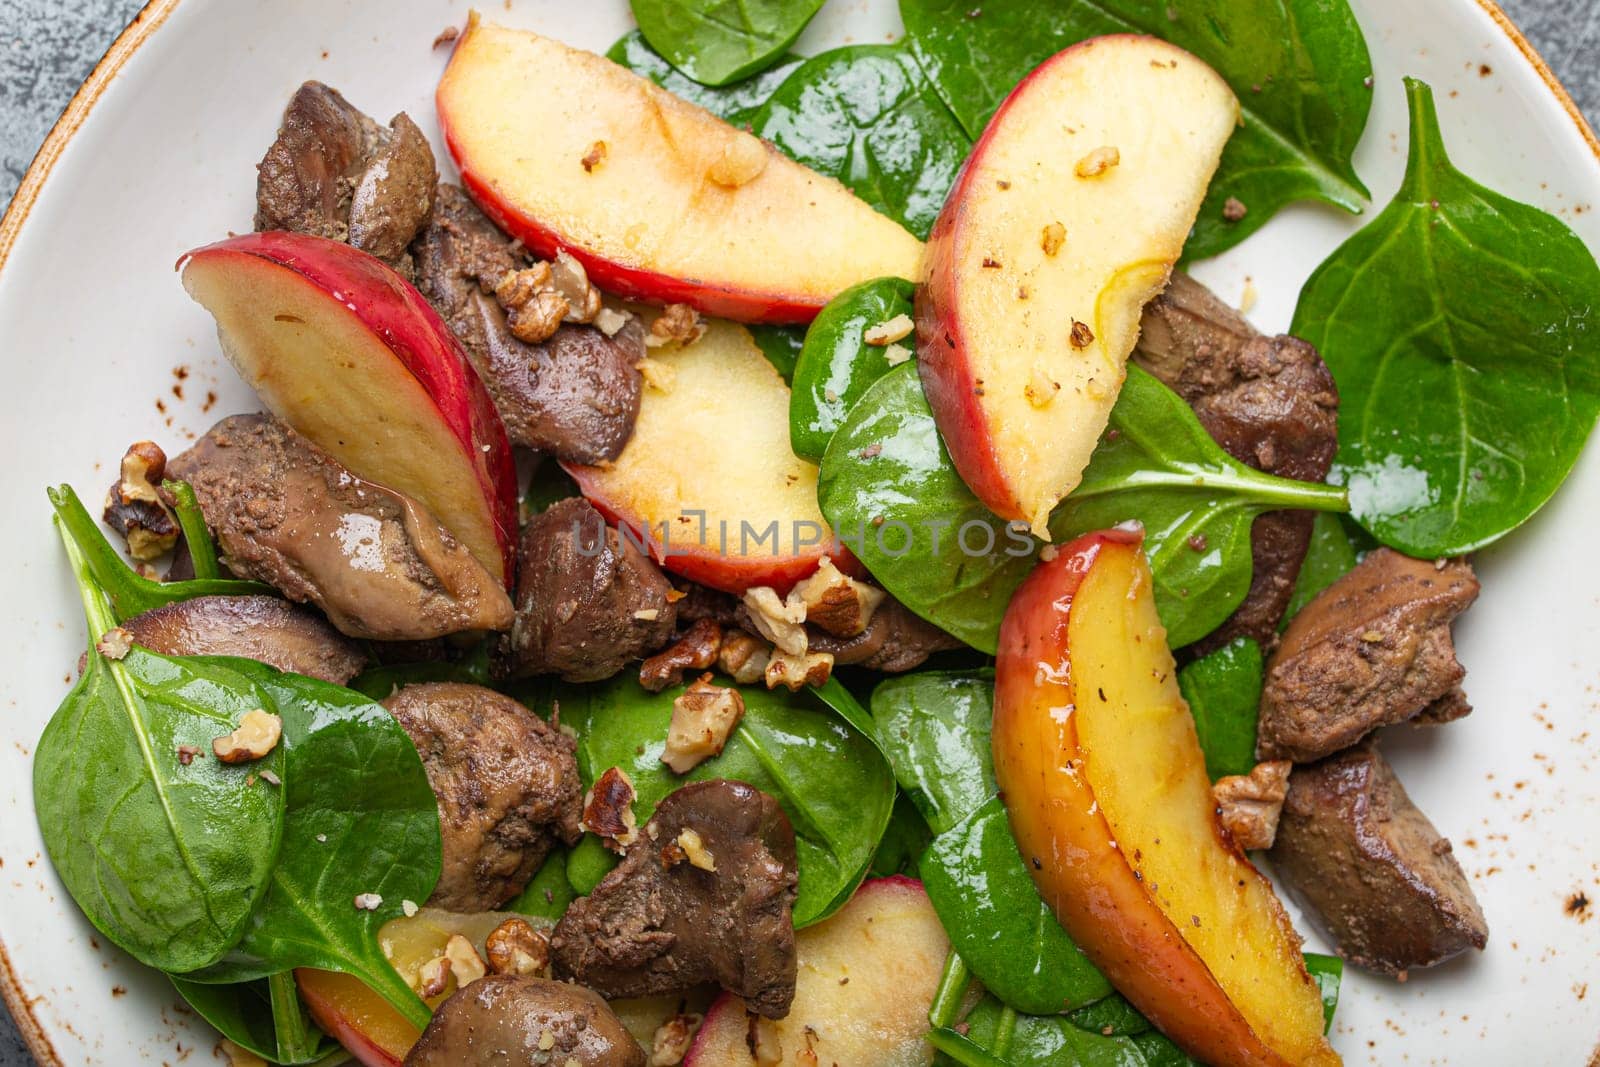 Close Up of Healthy Salad with Iron Rich Ingredients Chicken Liver, Apples, Fresh Spinach and Walnuts on White Ceramic Plate Top View.